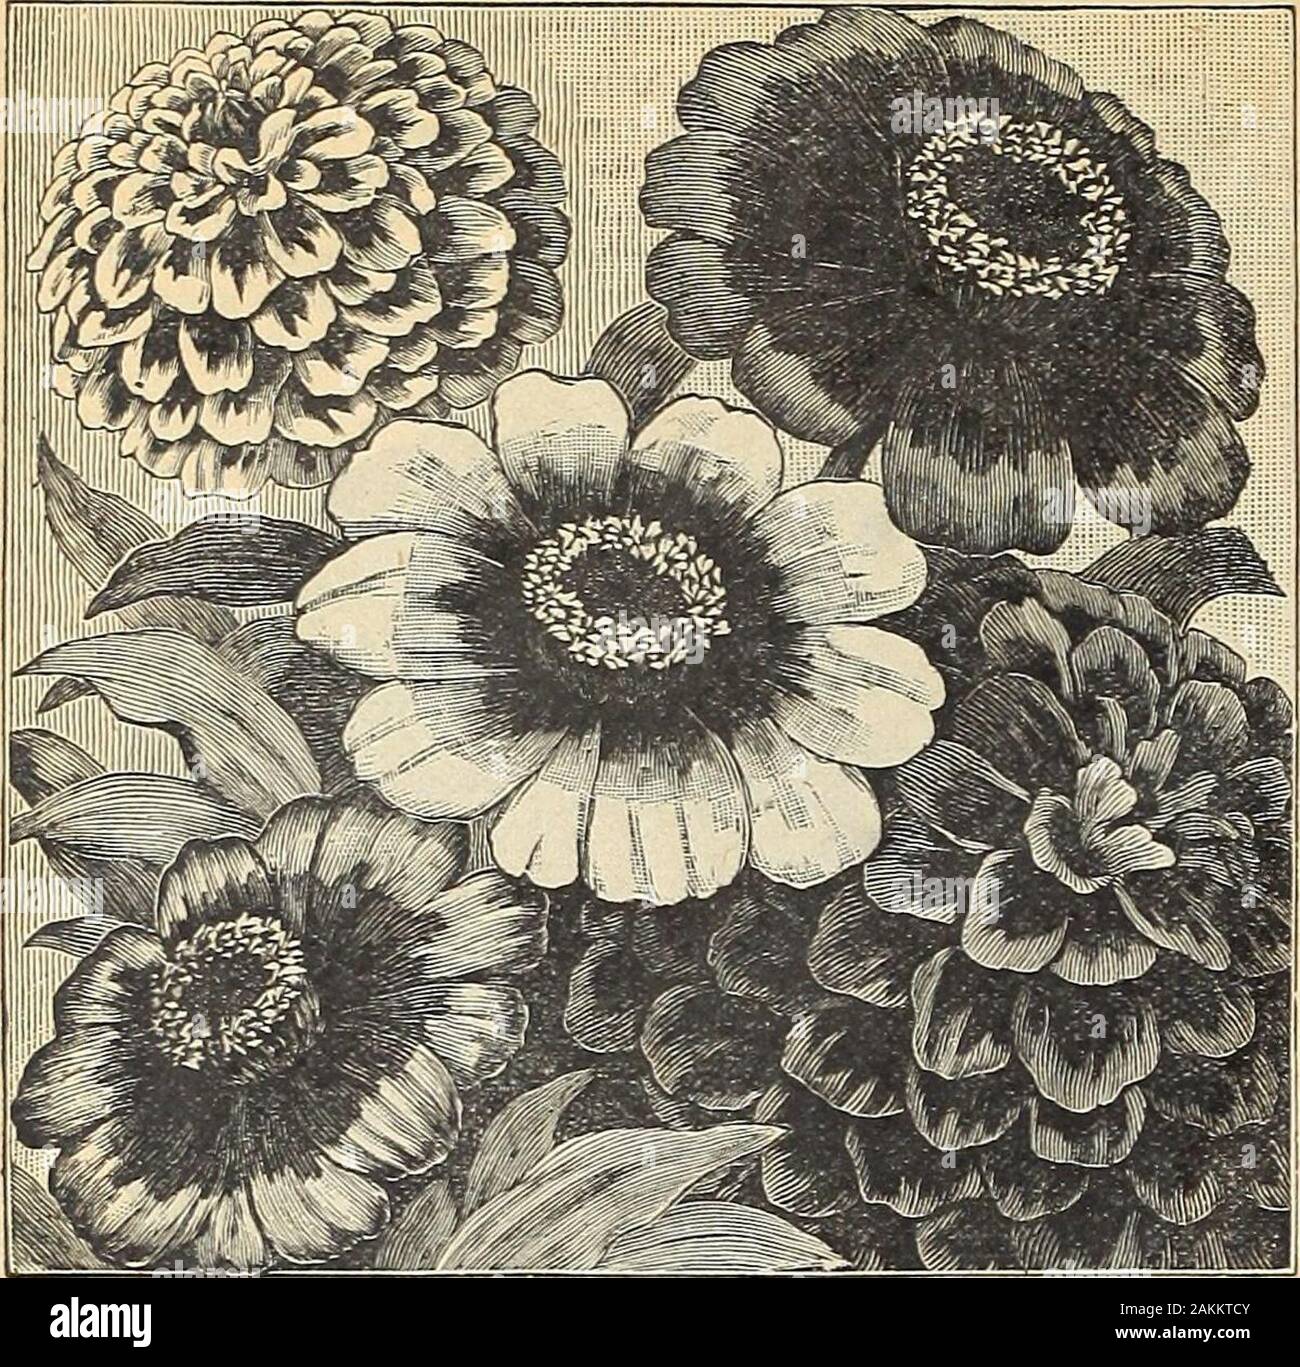 The Maule seed book : 1917 . Zinnia Stellata Hybrids, Single. Zinnia, Stellata Double. 2068 STELLATA HYBRIDS, SINGLE. [New.) They make asbriUiant display in beds, borders, etc. The rare colors found in thisstrain are very attractive. The colors include sulphur yellow, goldenyellow, deep orange, dark blood-red, yellow with red points and redwith yellow points. Mixed colors. Packet, 10 cents. 2066 STELLATA, DOUBLE. {New.) This resembles a smallsized double cactus dahlia flower. It forms dwarf, compact bushes andbears In great profusion its orange colored flowers. Packet, 15 centSa 160—Flower See Stock Photo